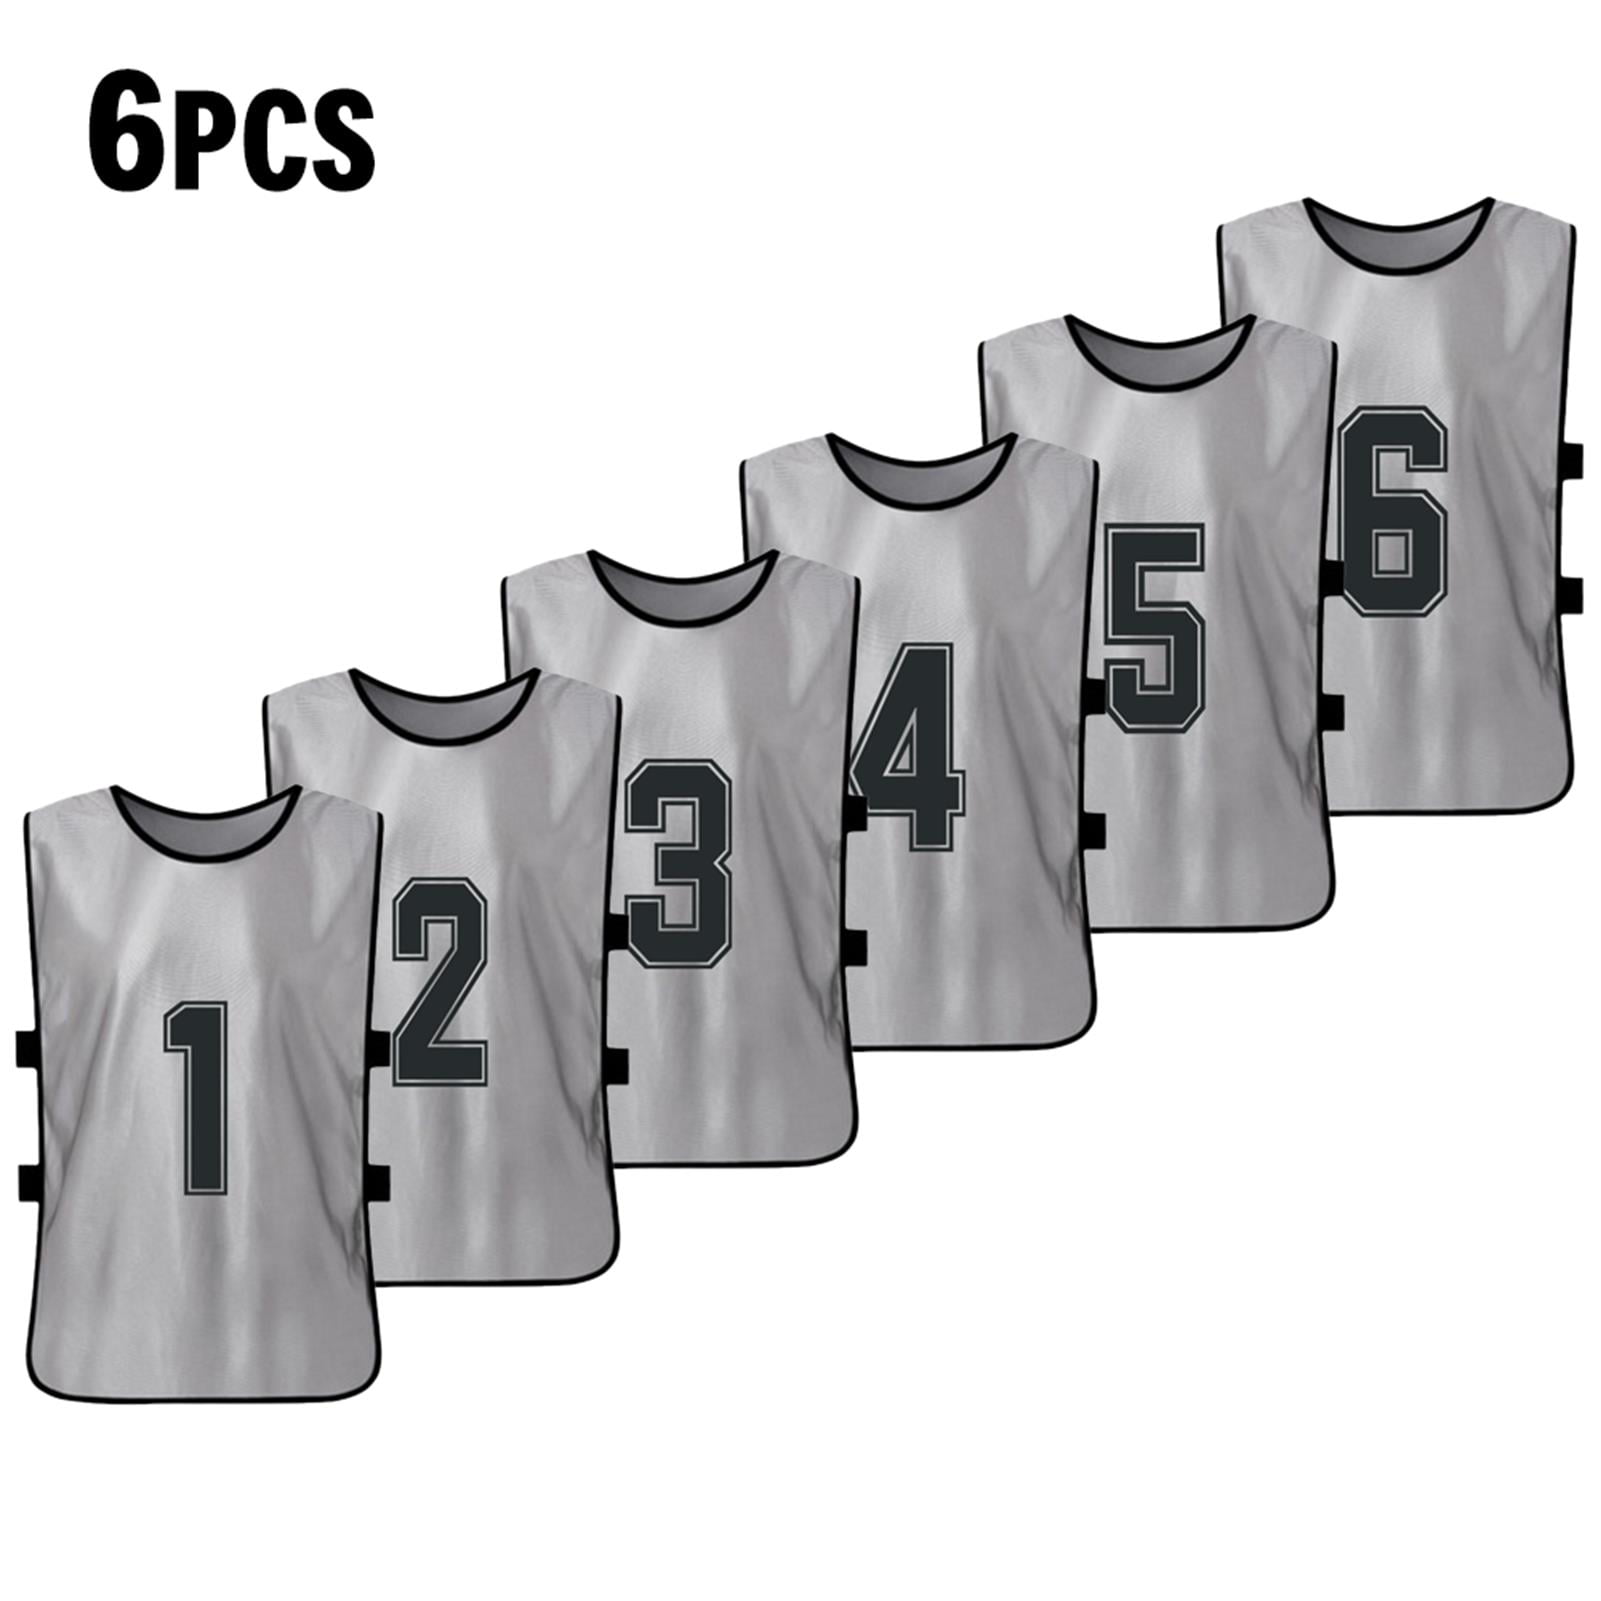 Set 6 PRO QUALITY scrimmage vests pinnies Youth gray Soccer Football  training 